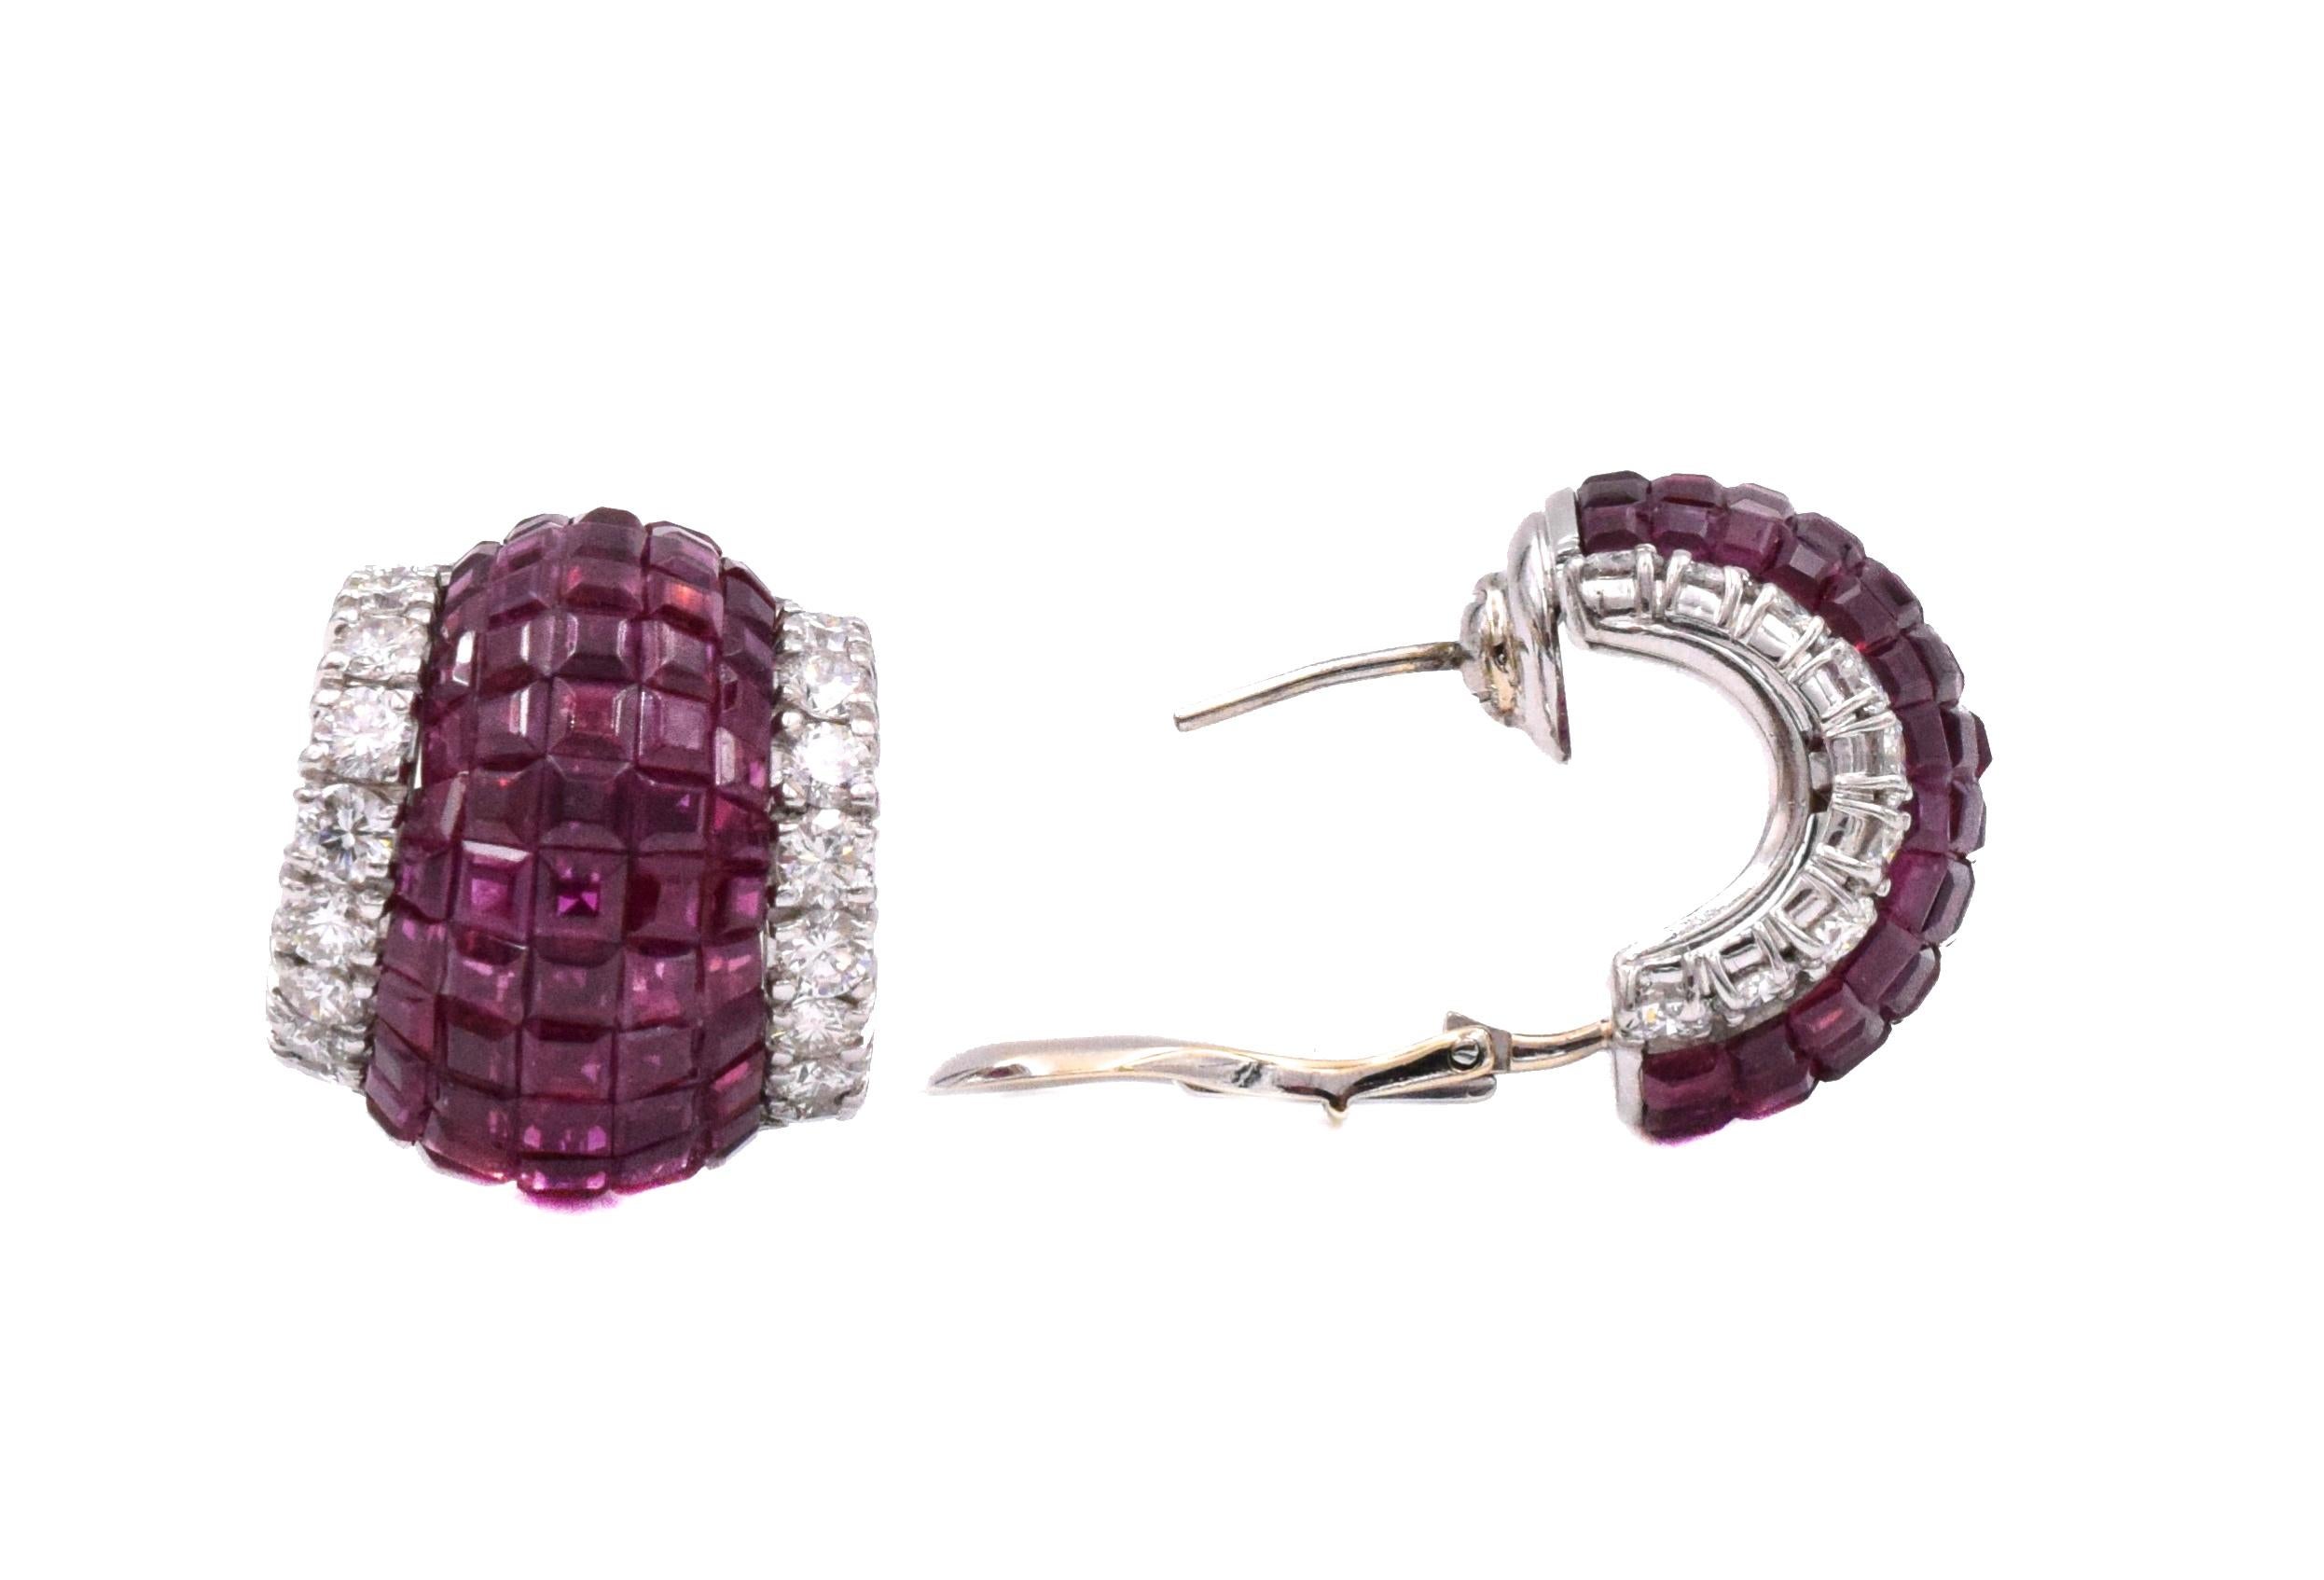 Artist Invisibly-Set Ruby and Diamond Earclips by Aletto Brothers